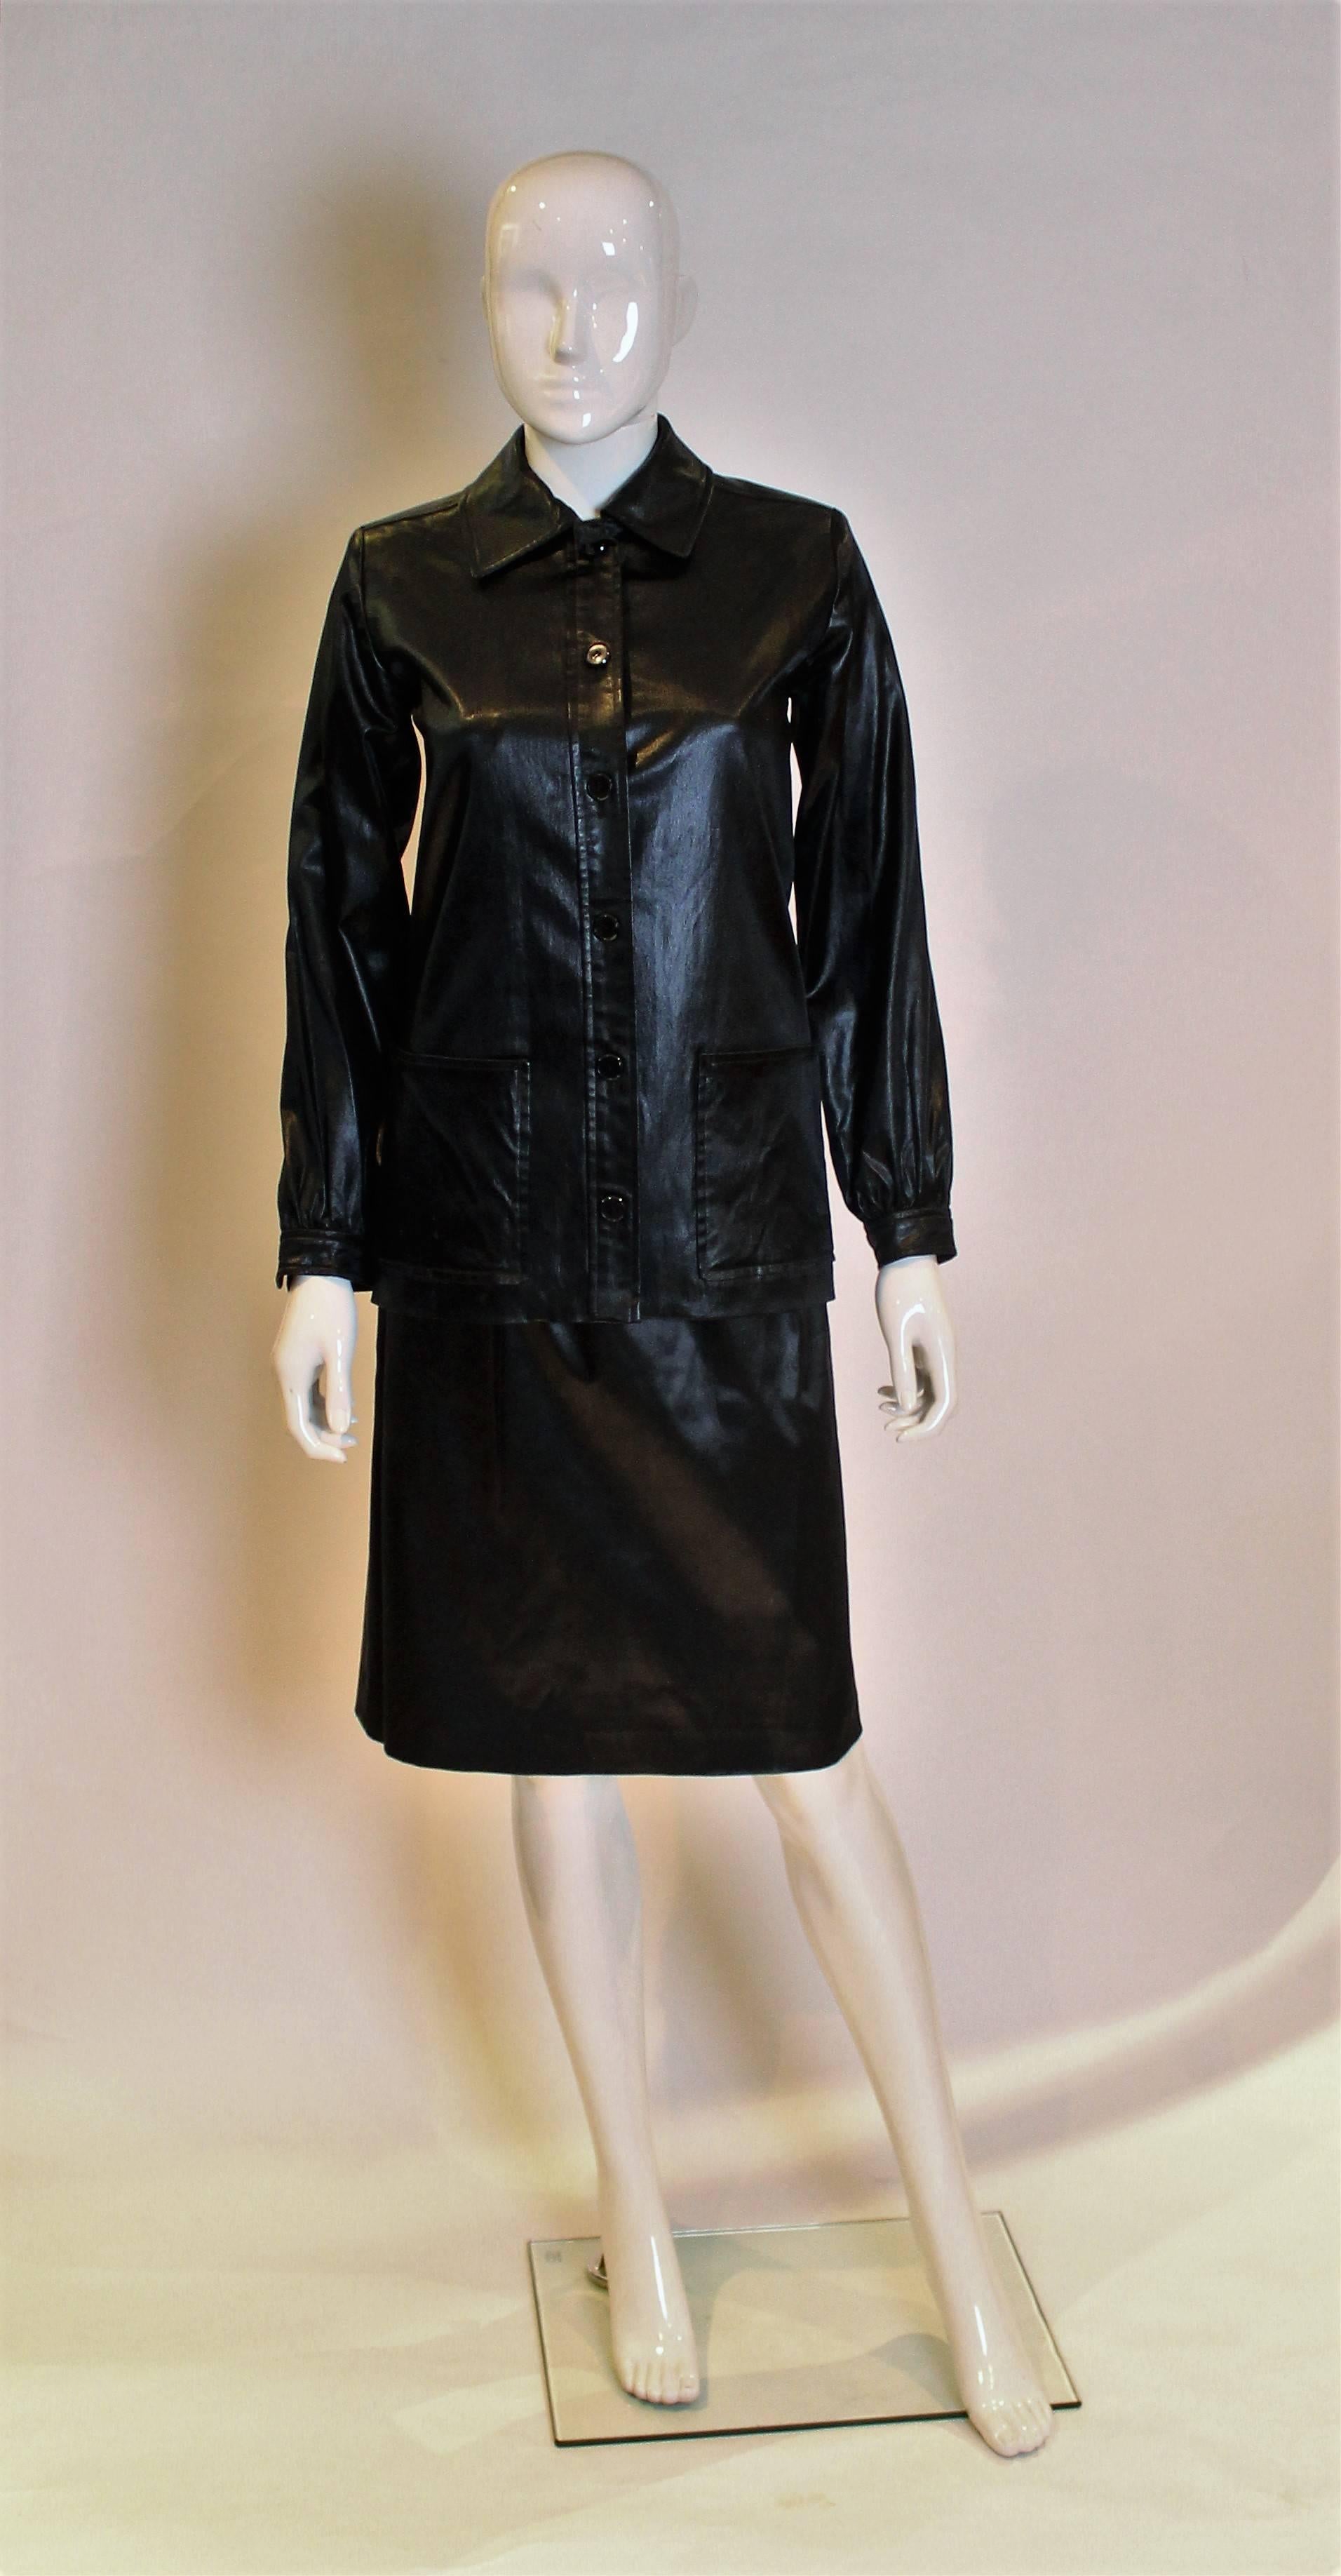 A skirt suit by Yves Saint Laurent in a 'wet look' fabric. 
The jacket fastens with 6 buttons on the front, has single button cuffs and two large pockets.The skirt has an elasticated  waist . Both size 36

Jacket : bust 34'', length 26 ''
Skirt: